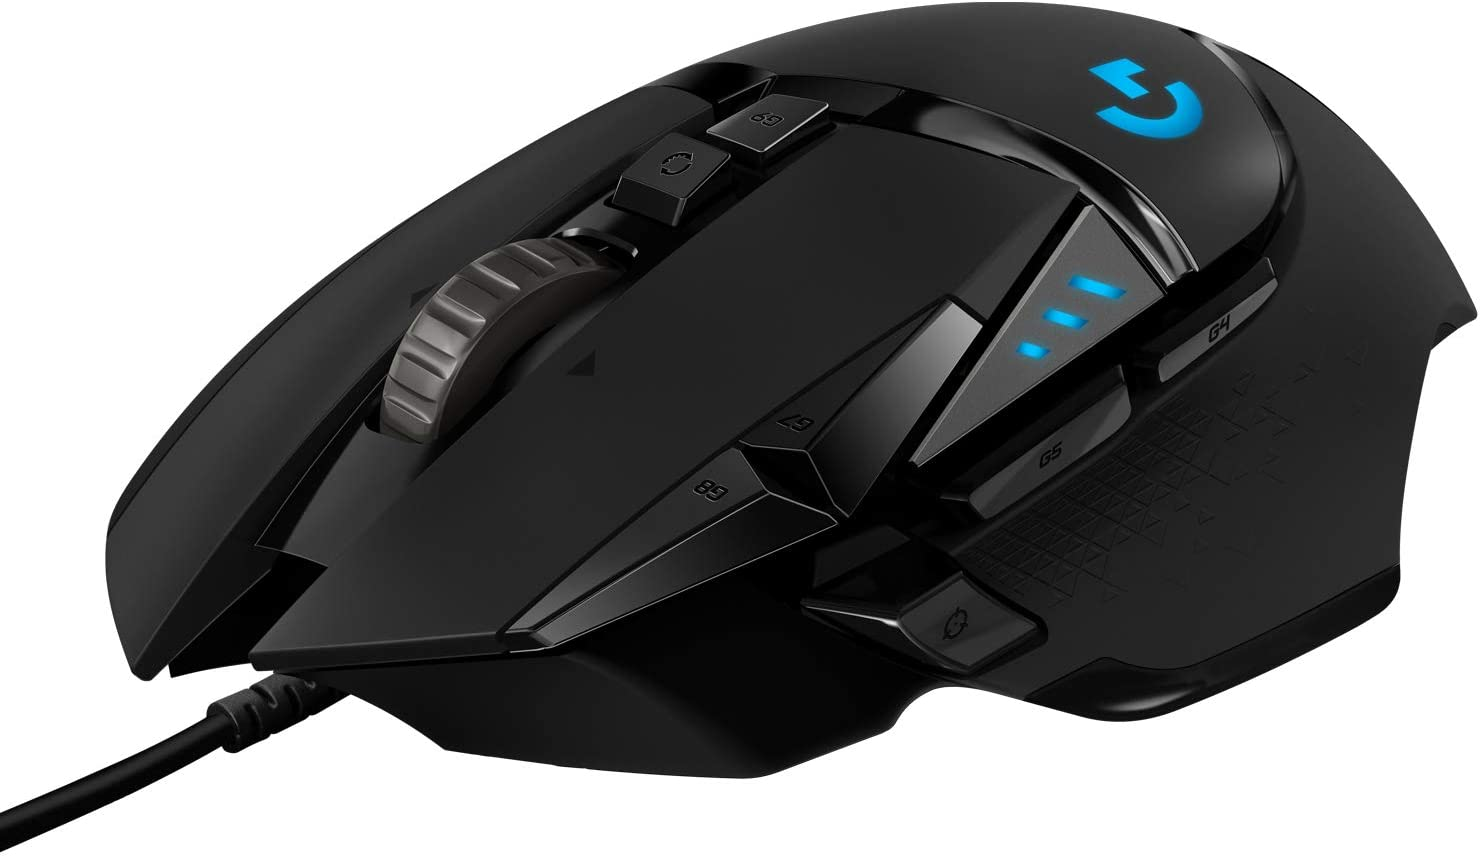 Logitech G502 HERO High Performance Wired Gaming Mouse $34